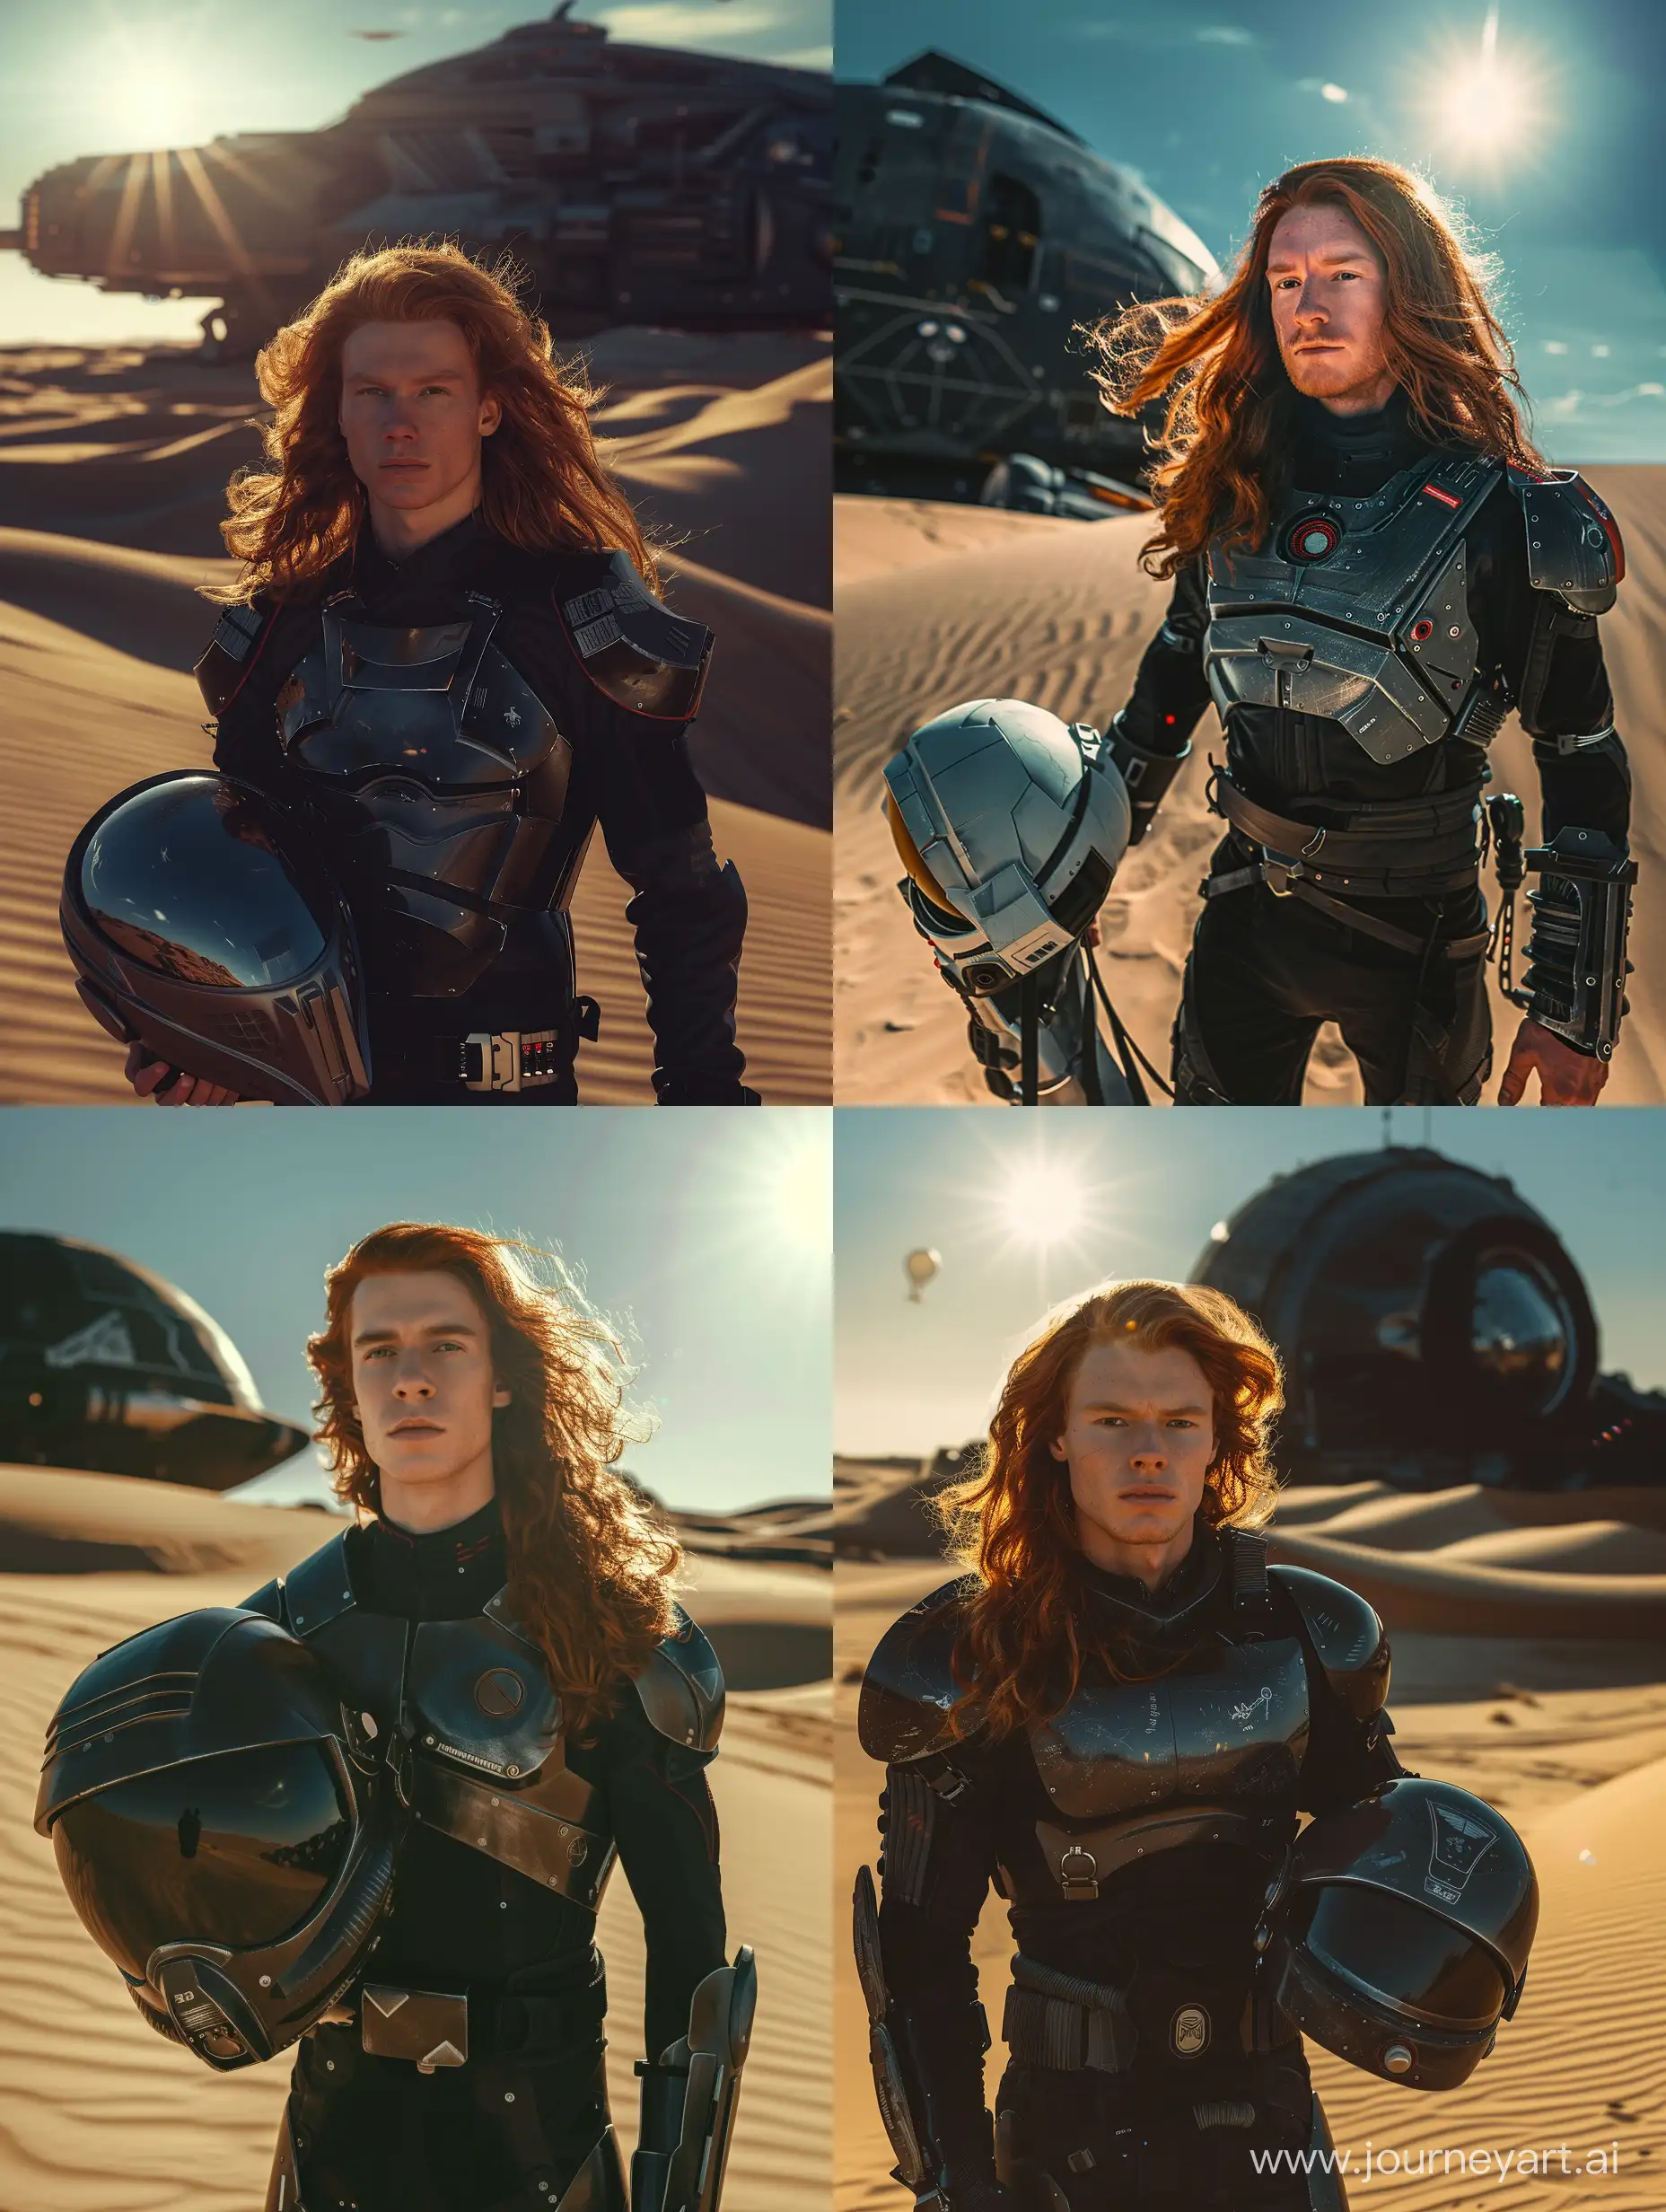 a handsome 20-old-year man in lightweight space protective space armor with a little long red hair in the foreground,
He holds the helmet in his hand,
large dunes,
sand, sun and blue sky,
a big spaceship in background,
beautiful,
sharpness,
romantic,
space fantastic,
photography,
close-up,
hyper detailed,
sharp focus,
studio photo,
intricate details,
highly detailed,
in the style of black and dark silver,
dream-like quality,
pensive poses,
precise detailing,
shine,
saturated colors
